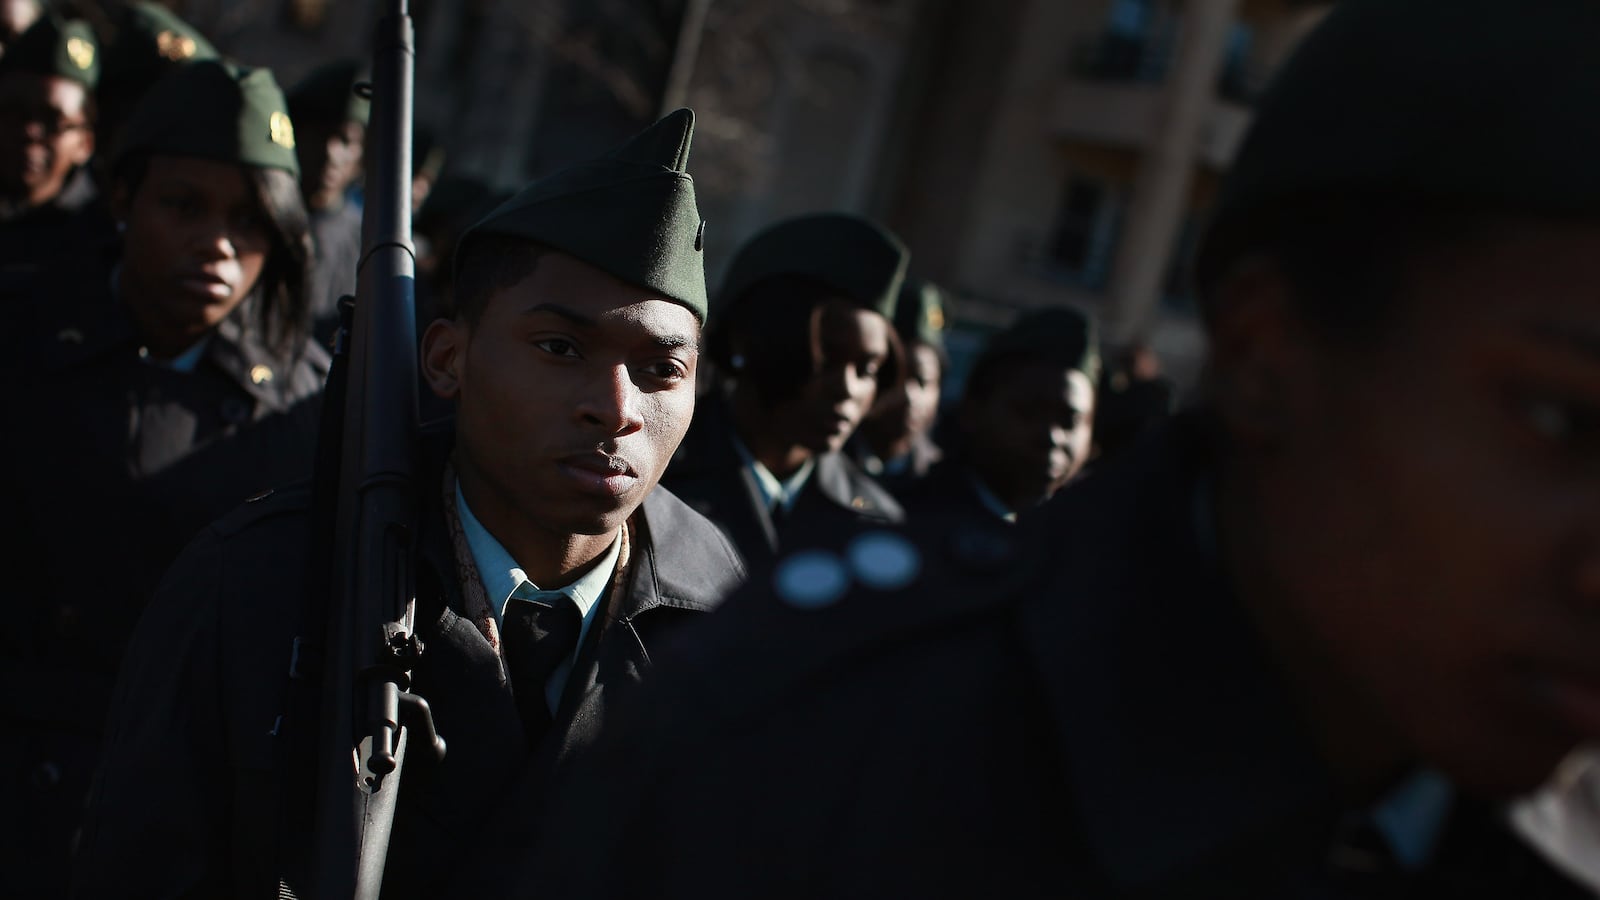 JROTC cadets, wearing full dress uniforms and holding wooden rifles, march in formation at a parade.